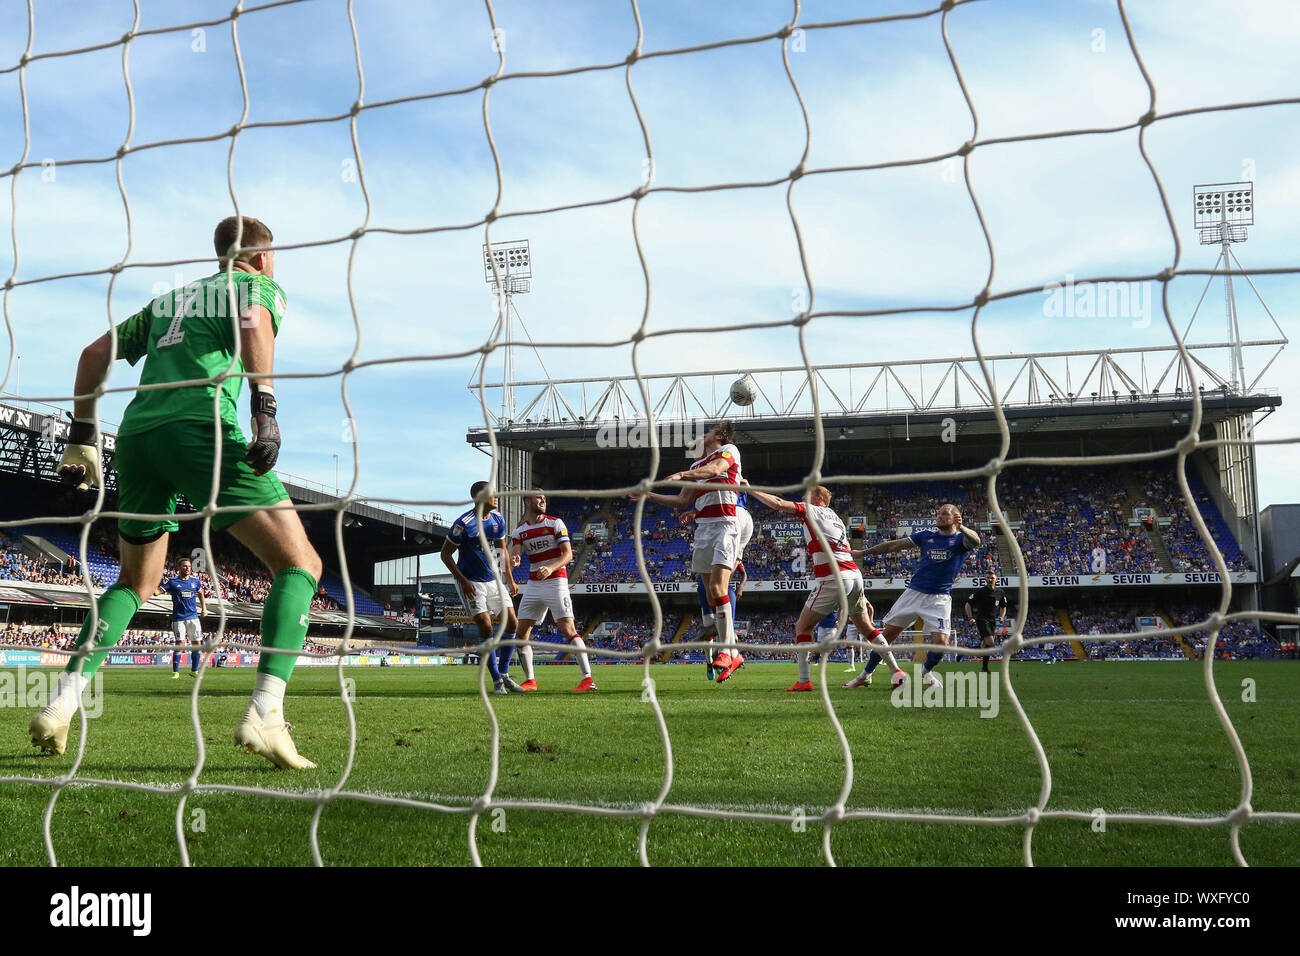 James Norwood of Ipswich Town looks to get on the end of a cross - Ipswich Town v Doncaster Rovers, Sky Bet League One, Portman Road, Ipswich, UK - 14th September 2019  Editorial Use Only - DataCo restrictions apply Stock Photo